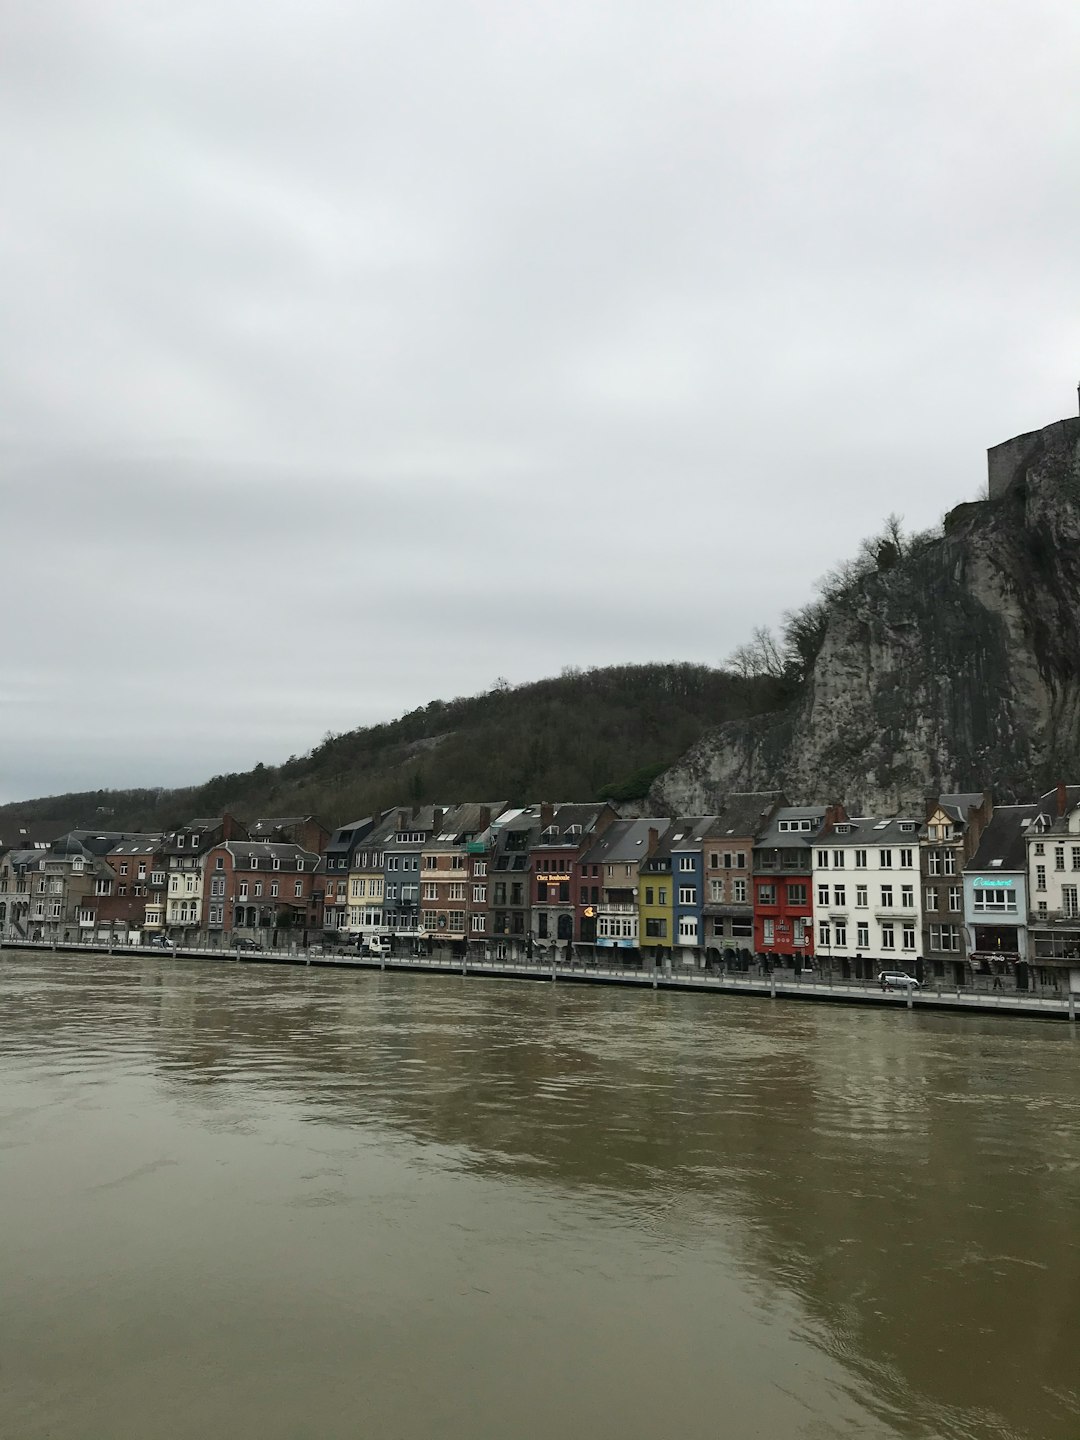 Travel Tips and Stories of Dinant in Belgium